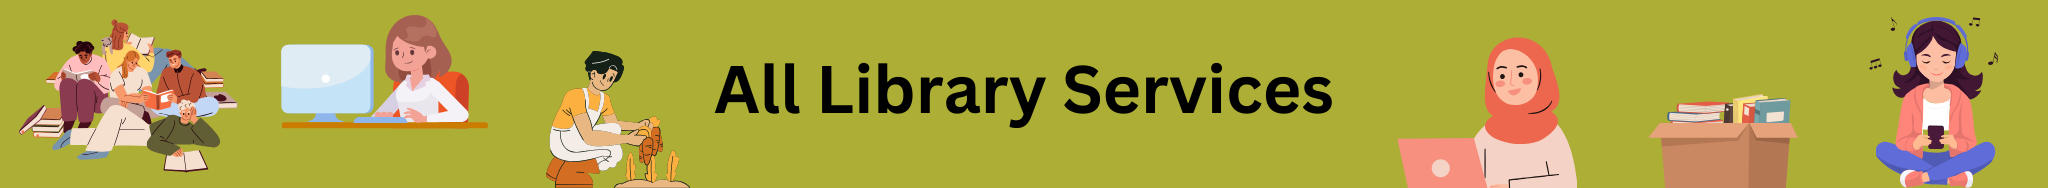 All Library Services